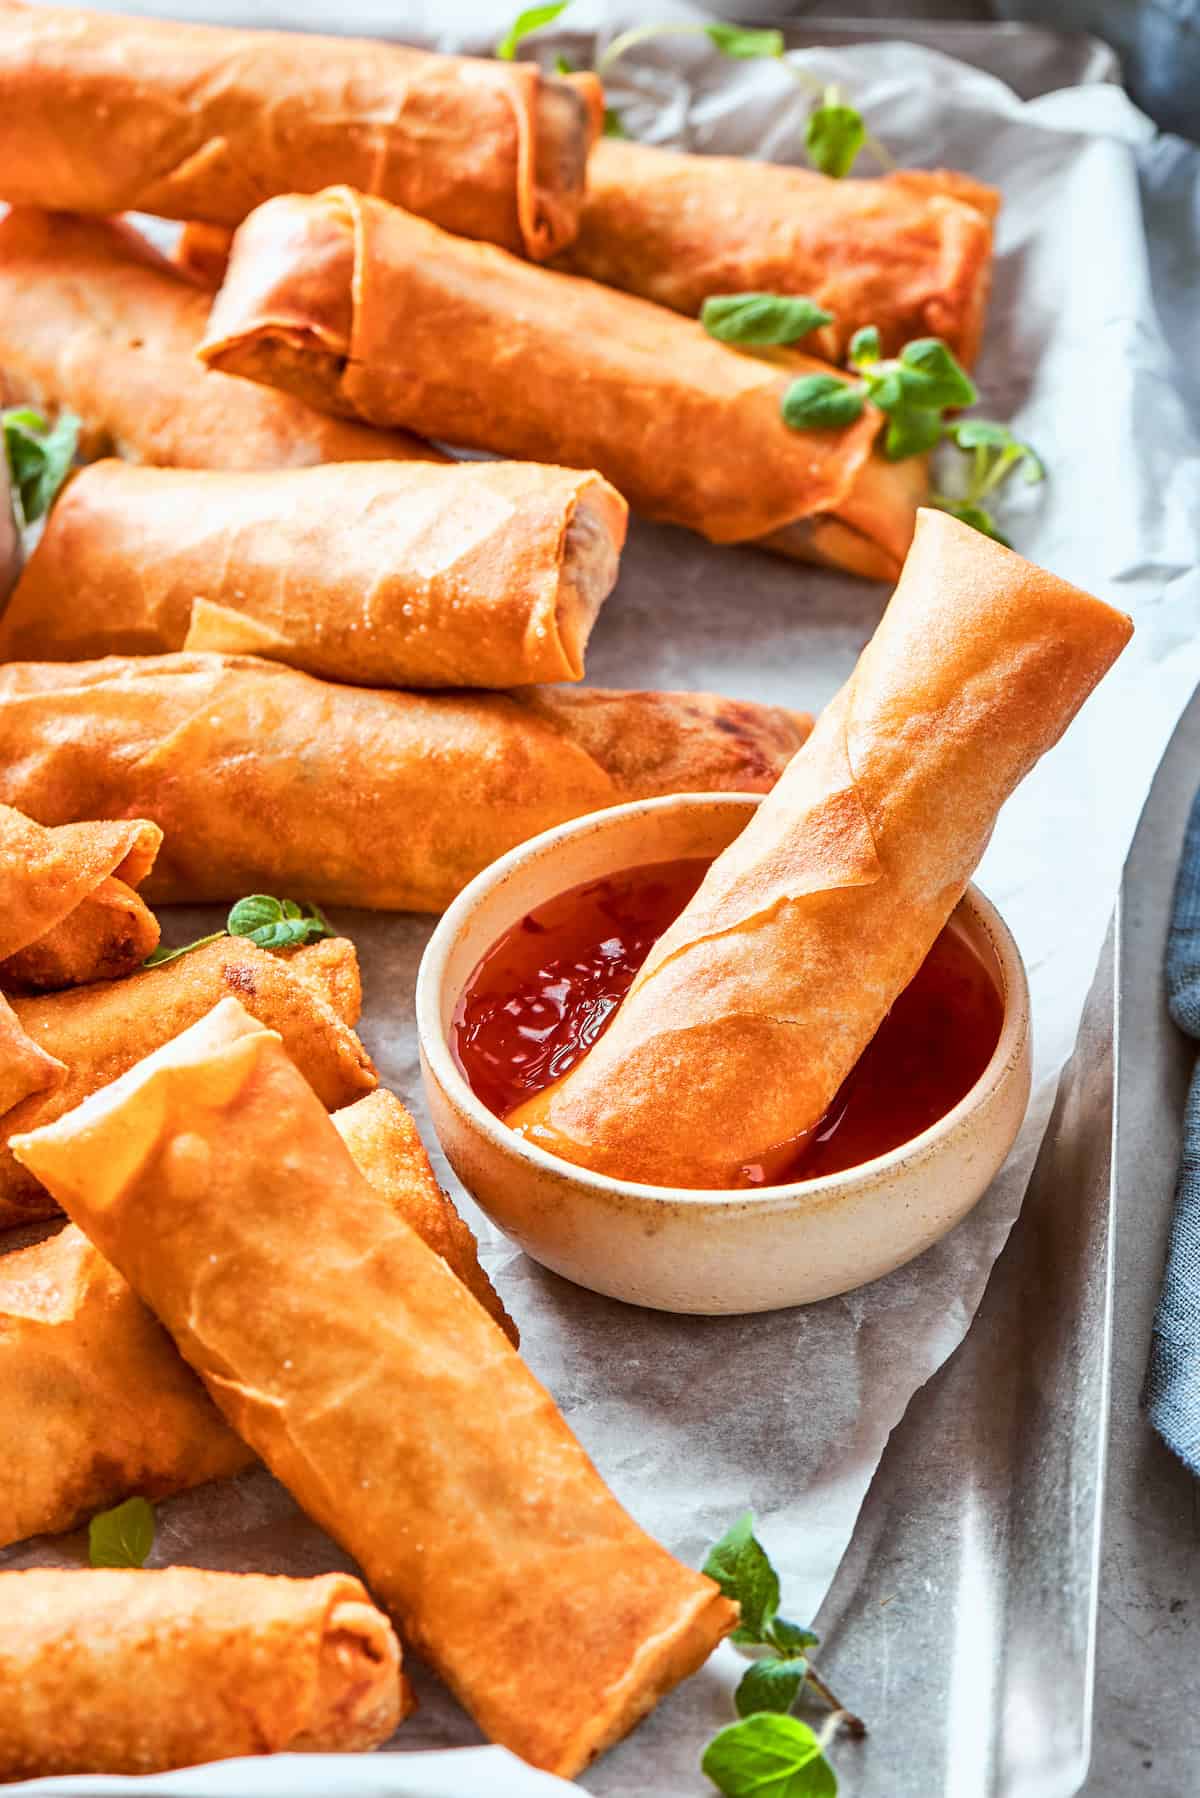 A chicken egg roll is dipped into sauce while other rolls lie around it.